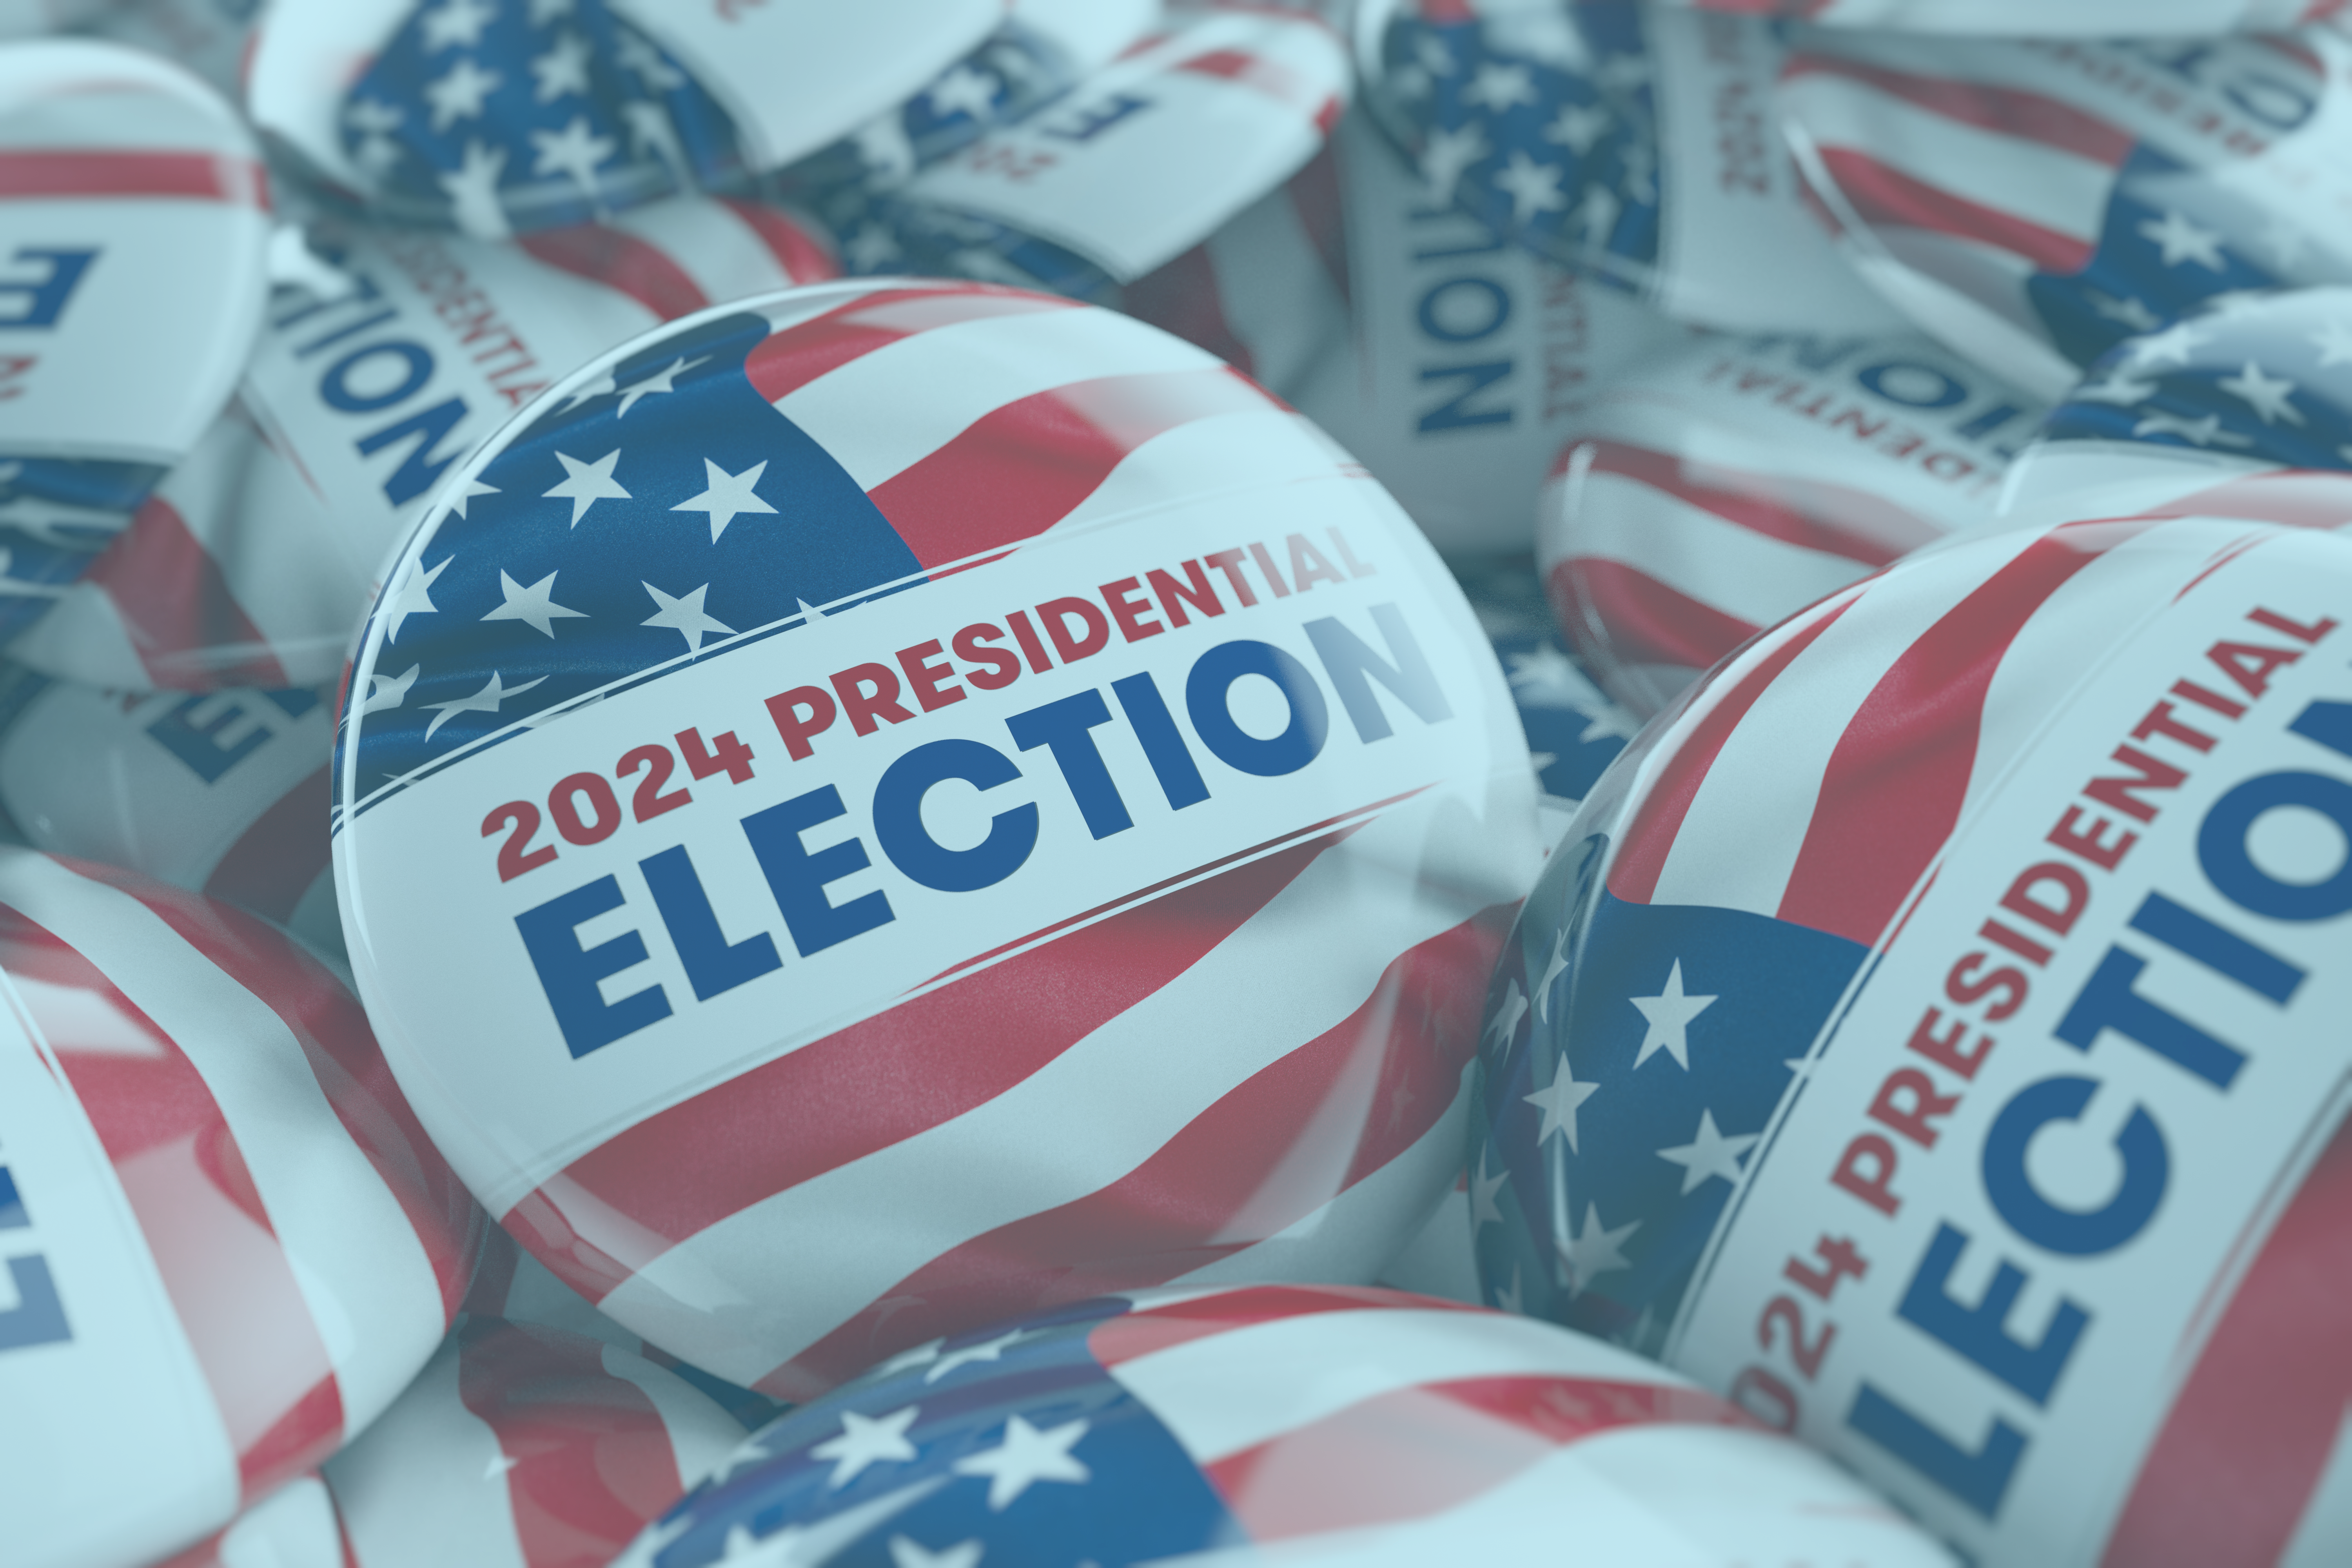 Closeup shot of one presidential election 2024 button in focus in between many other buttons in a box